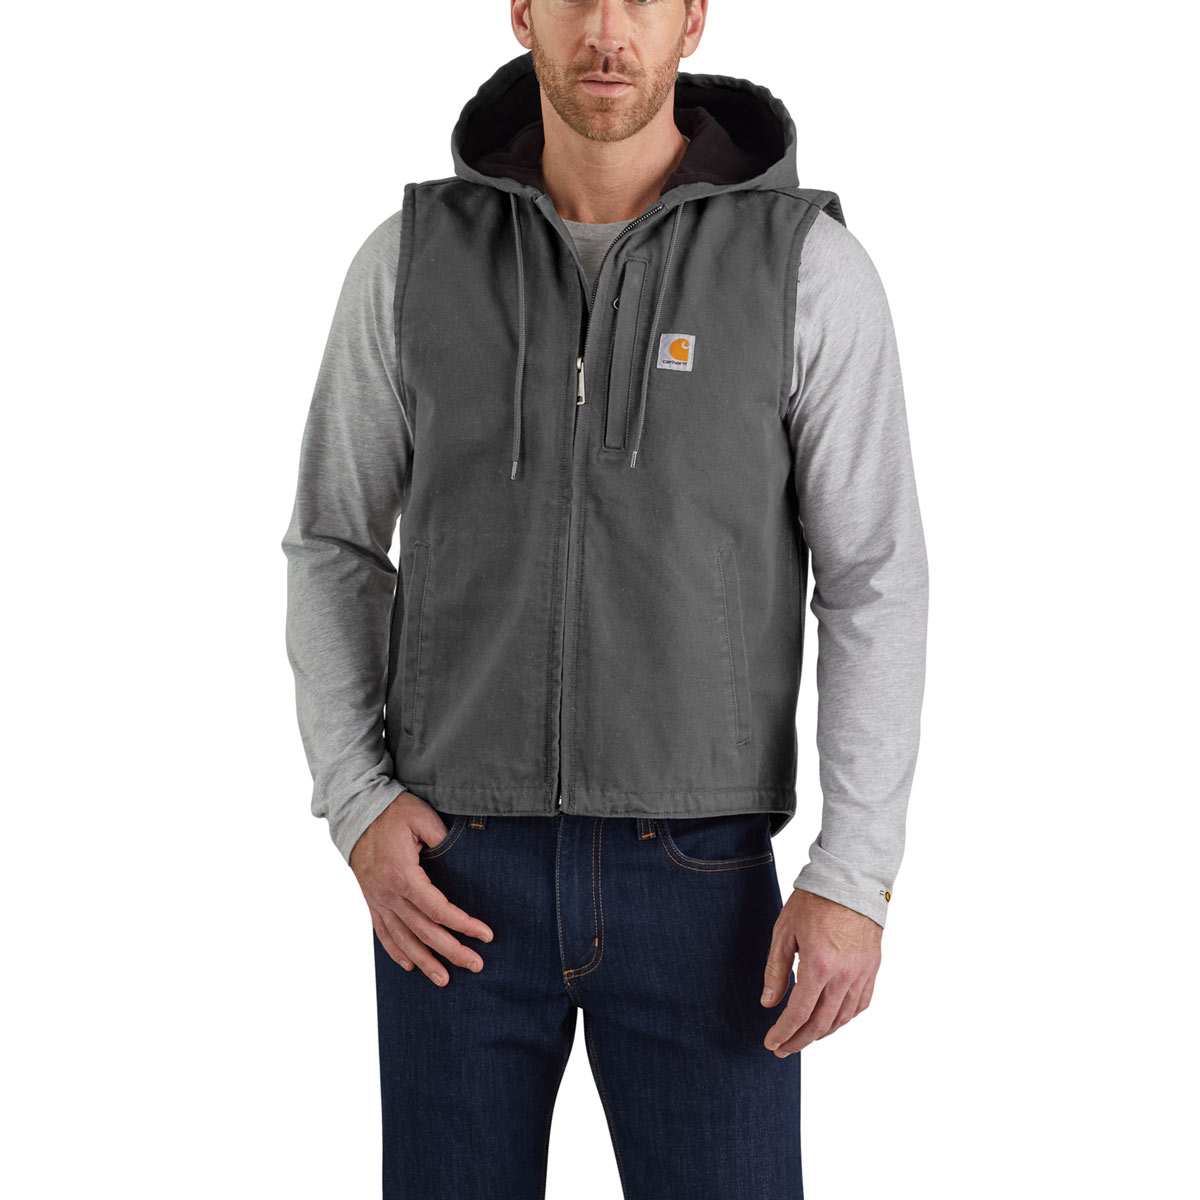 Carhartt Washed Duck Knoxville hooded vest